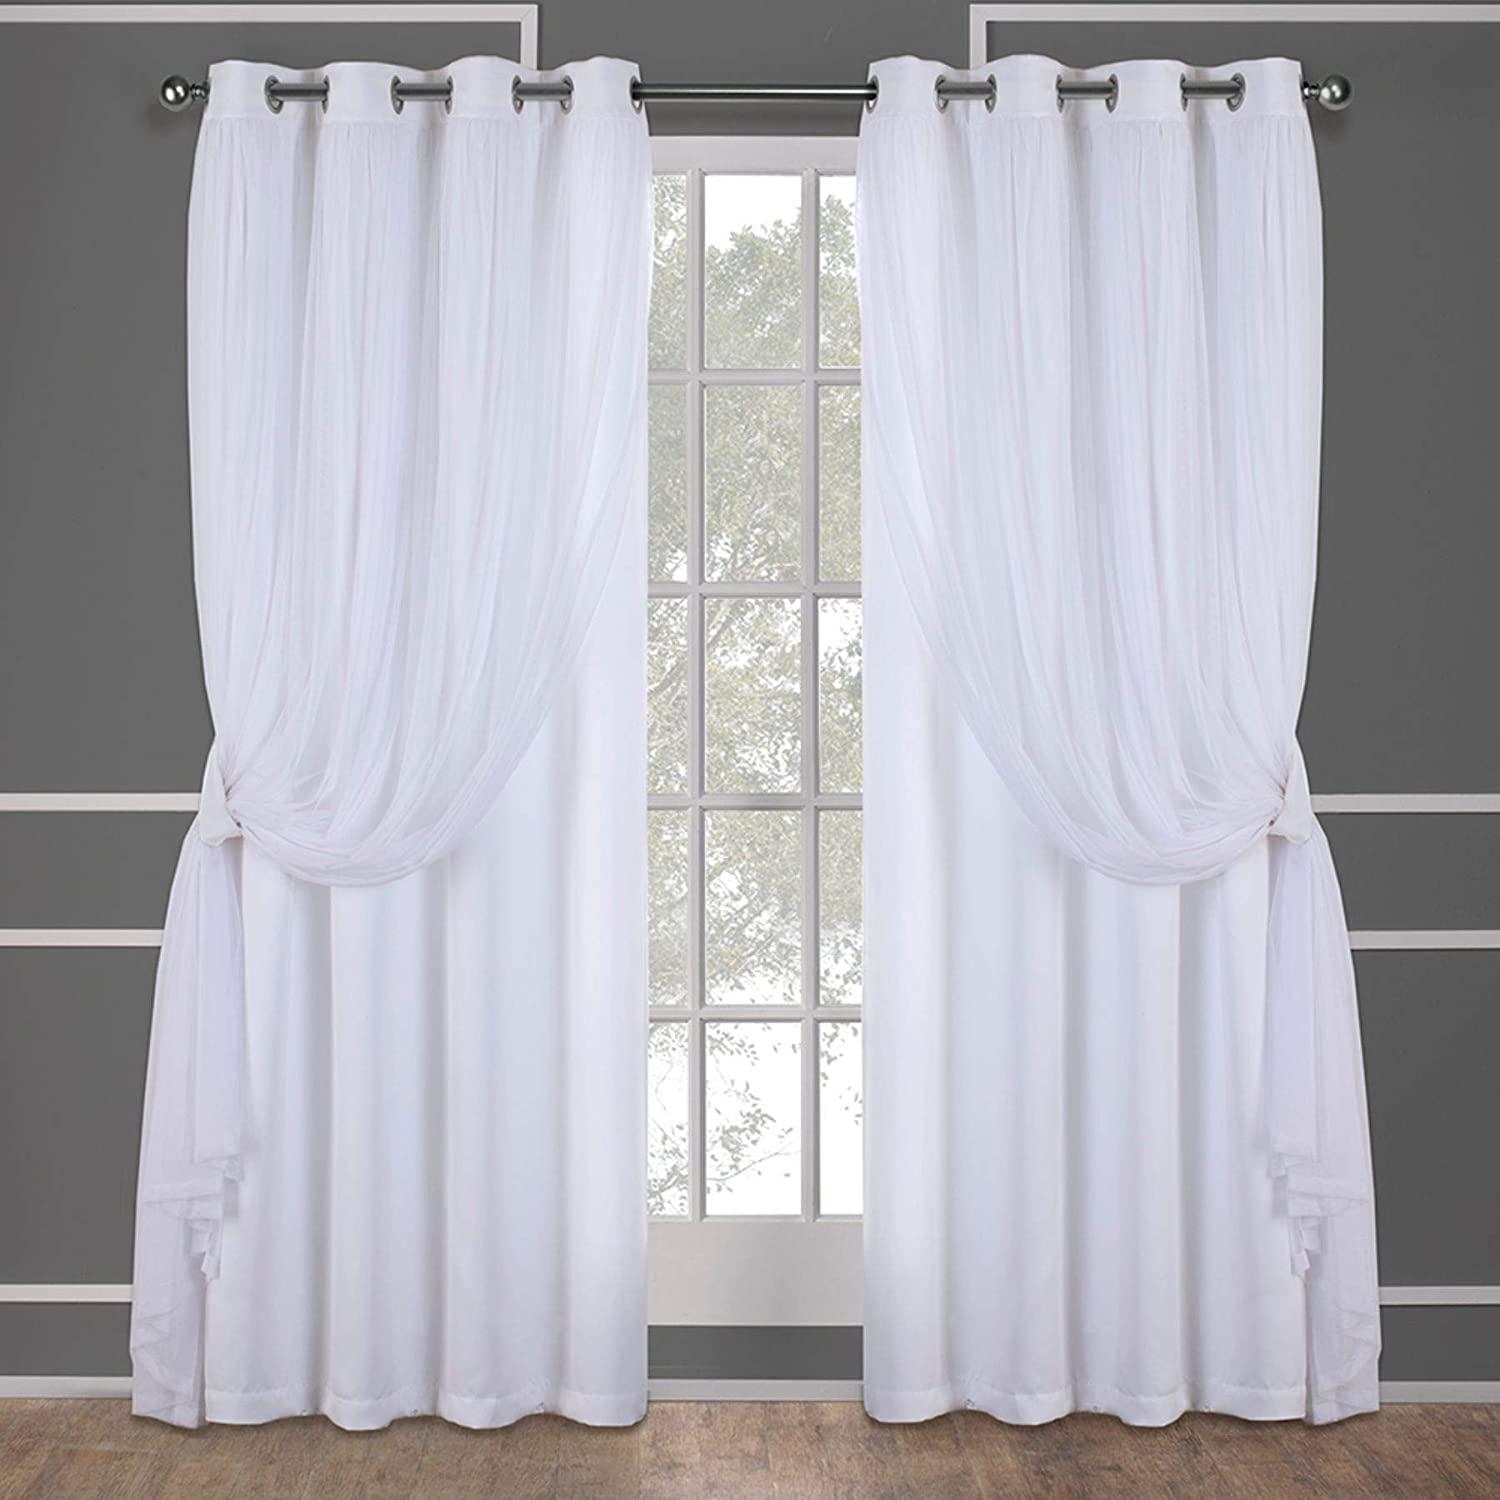 Catarina Layered Solid Blackout and Sheer Window Curtains for $38.69 Shipped